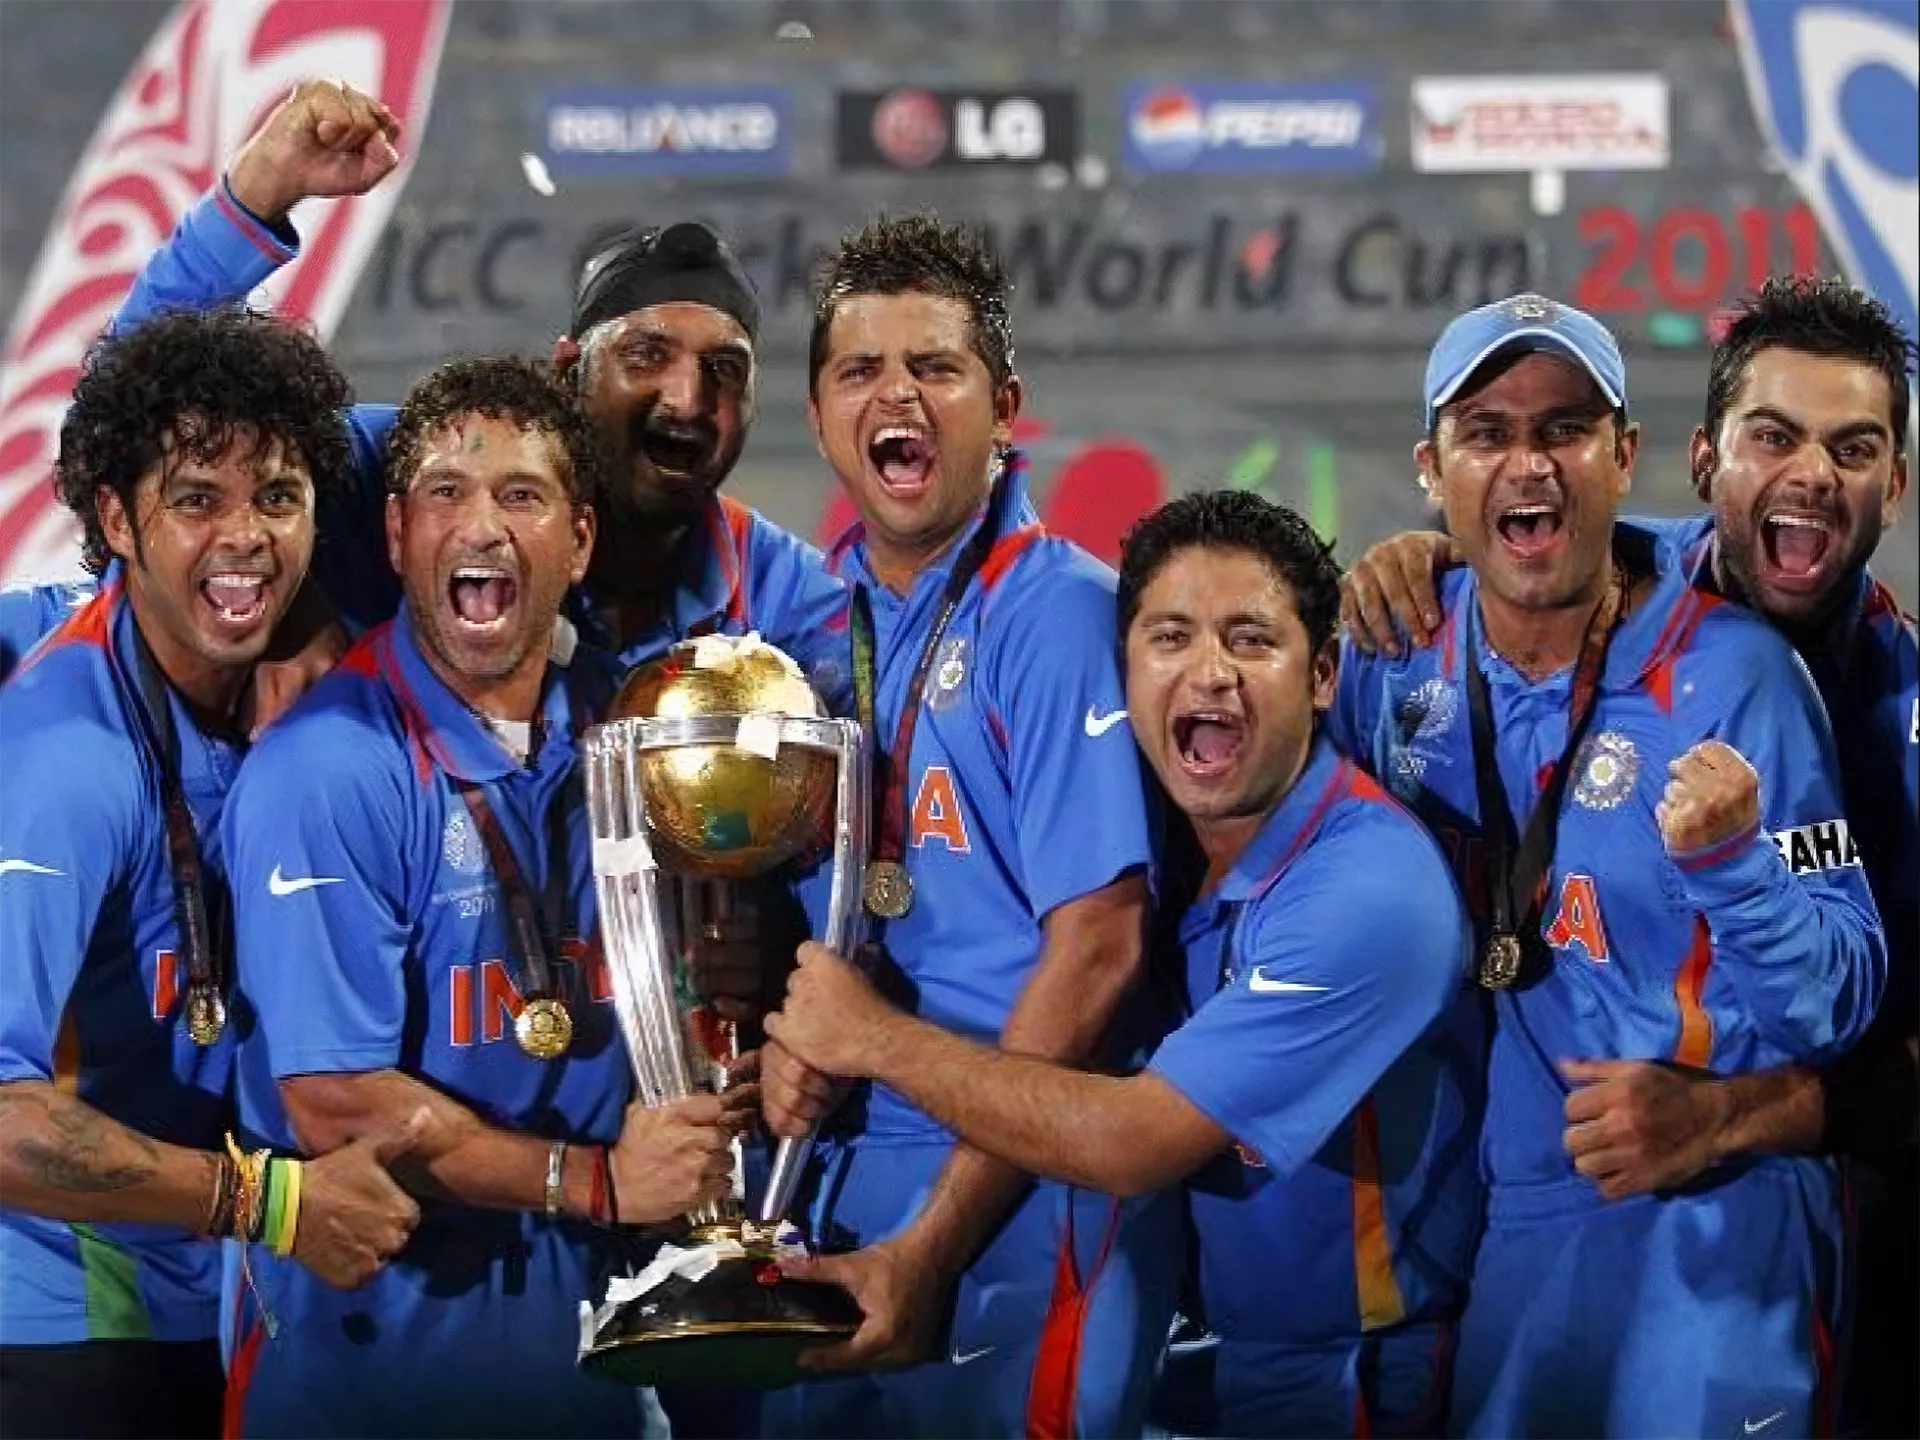 You can place bets on the ICC World Cup (ICC CWC) after registering on the site